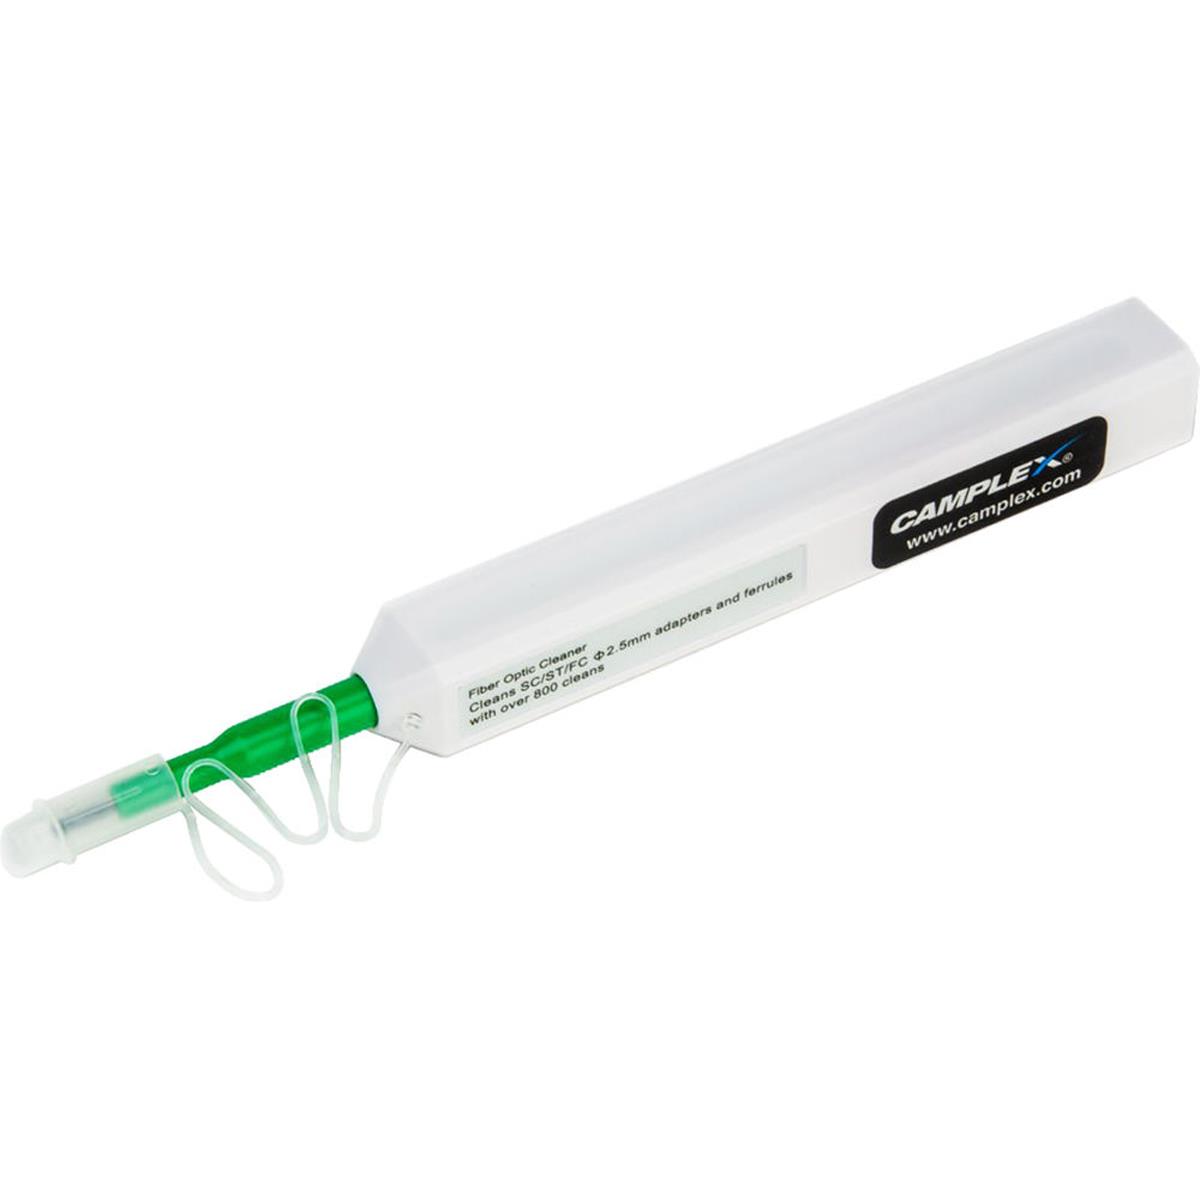 Image of Camplex One-Click Cleaner for Fiber Optic SC/ST Connectors 2.5mm